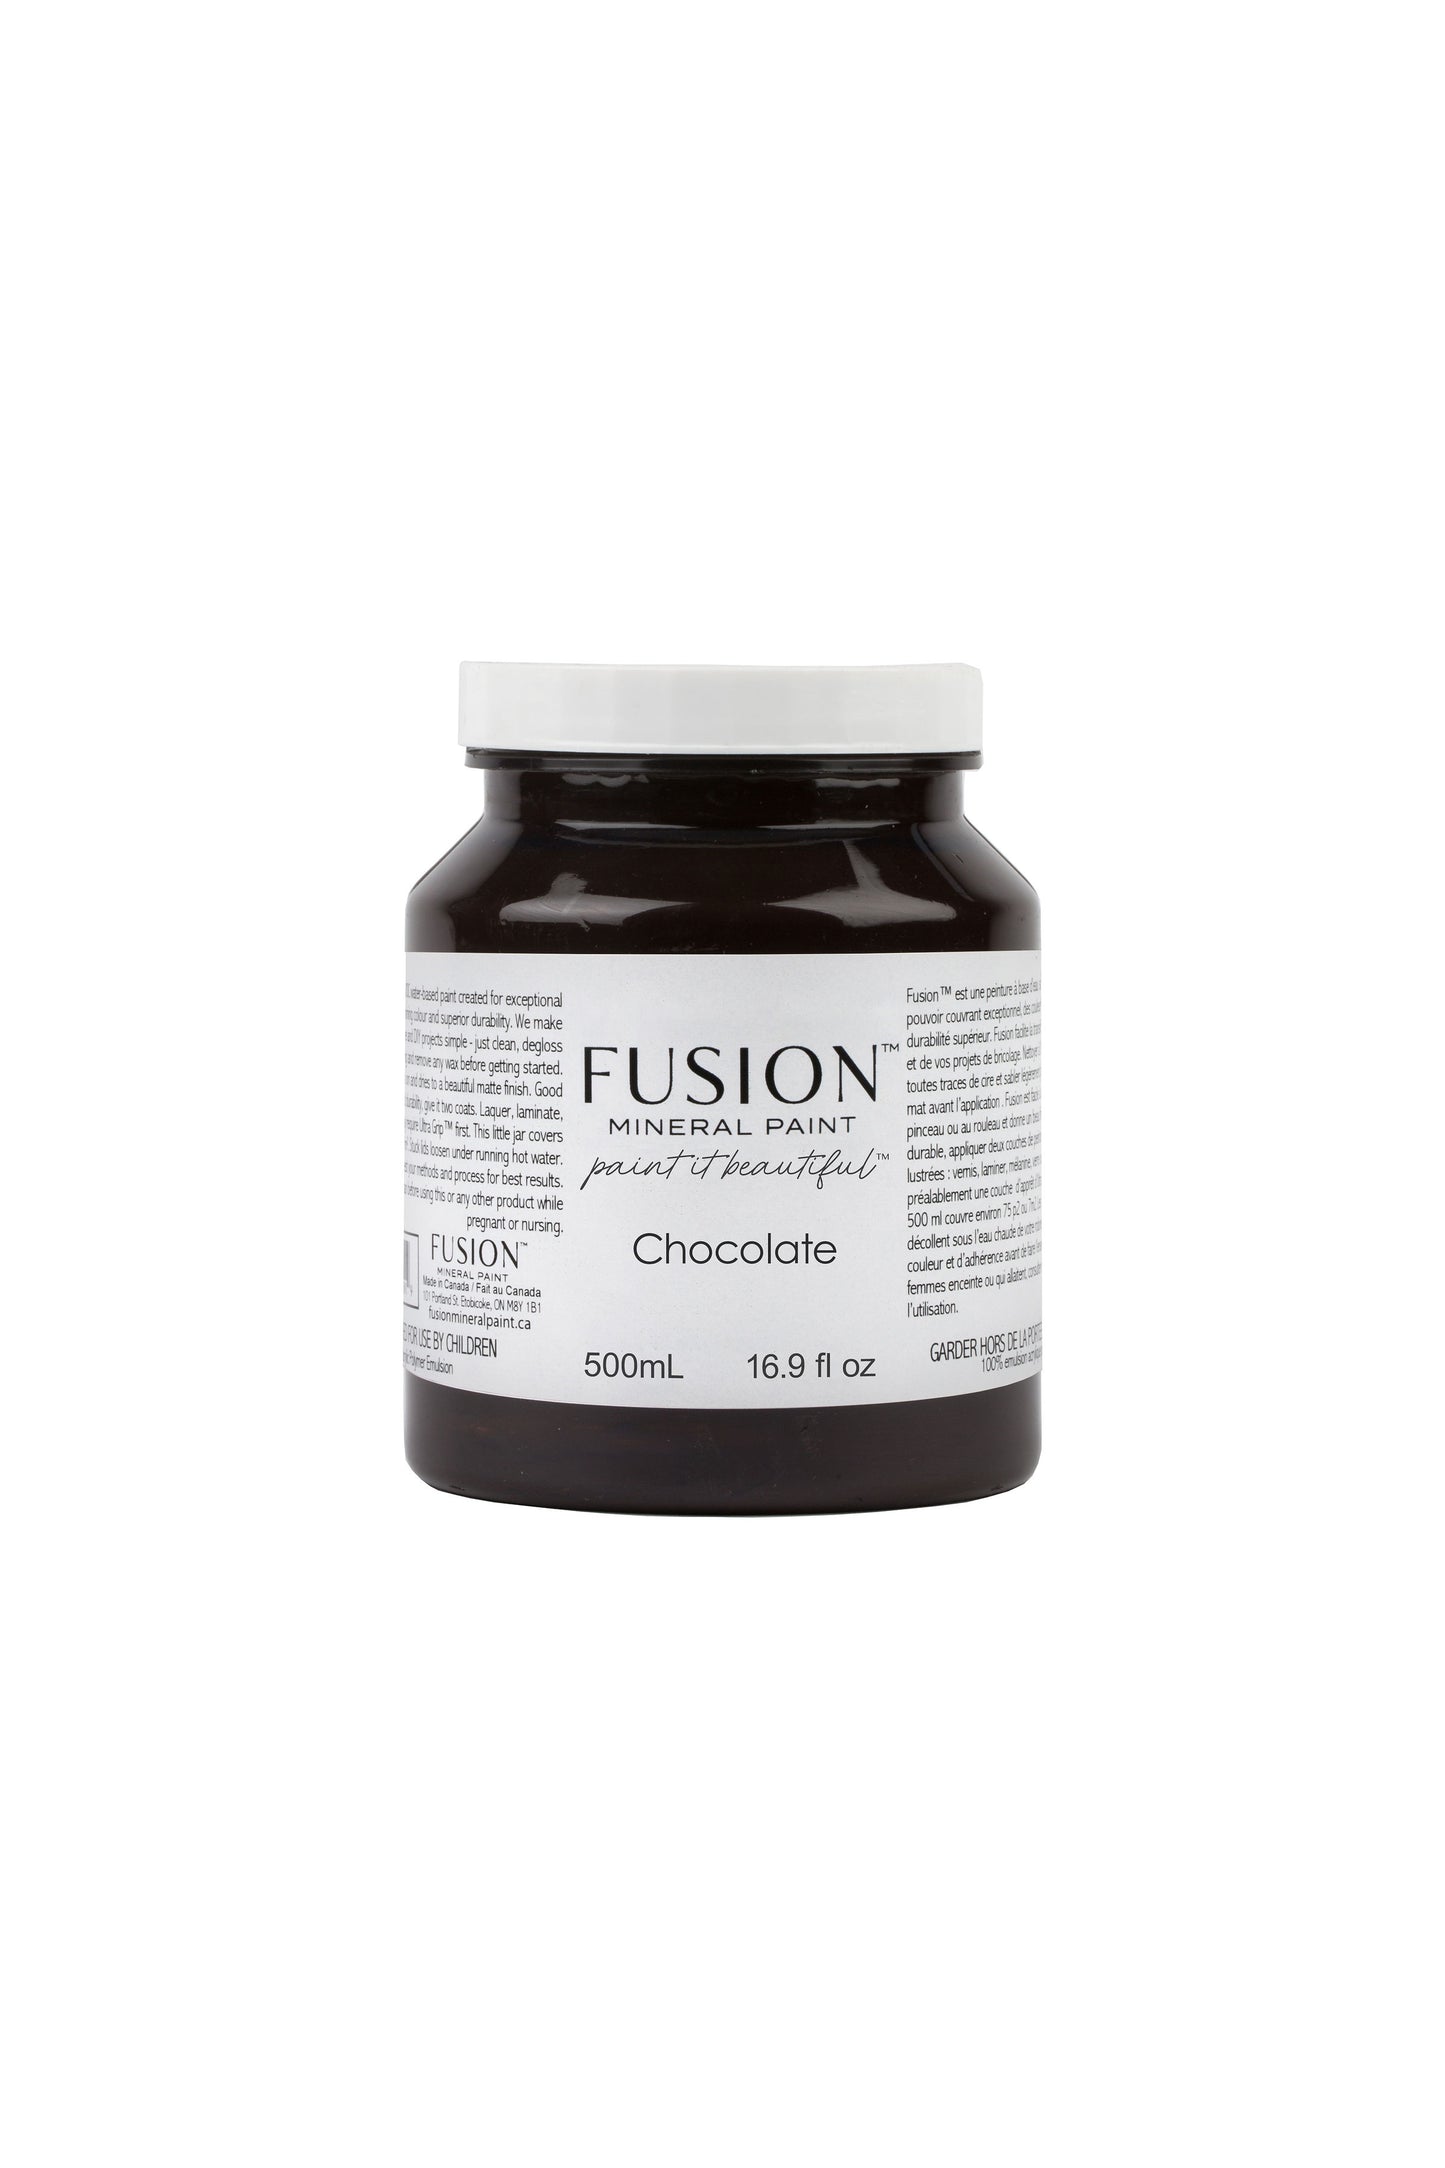 FUSION MINERAL PAINT- Chocolate